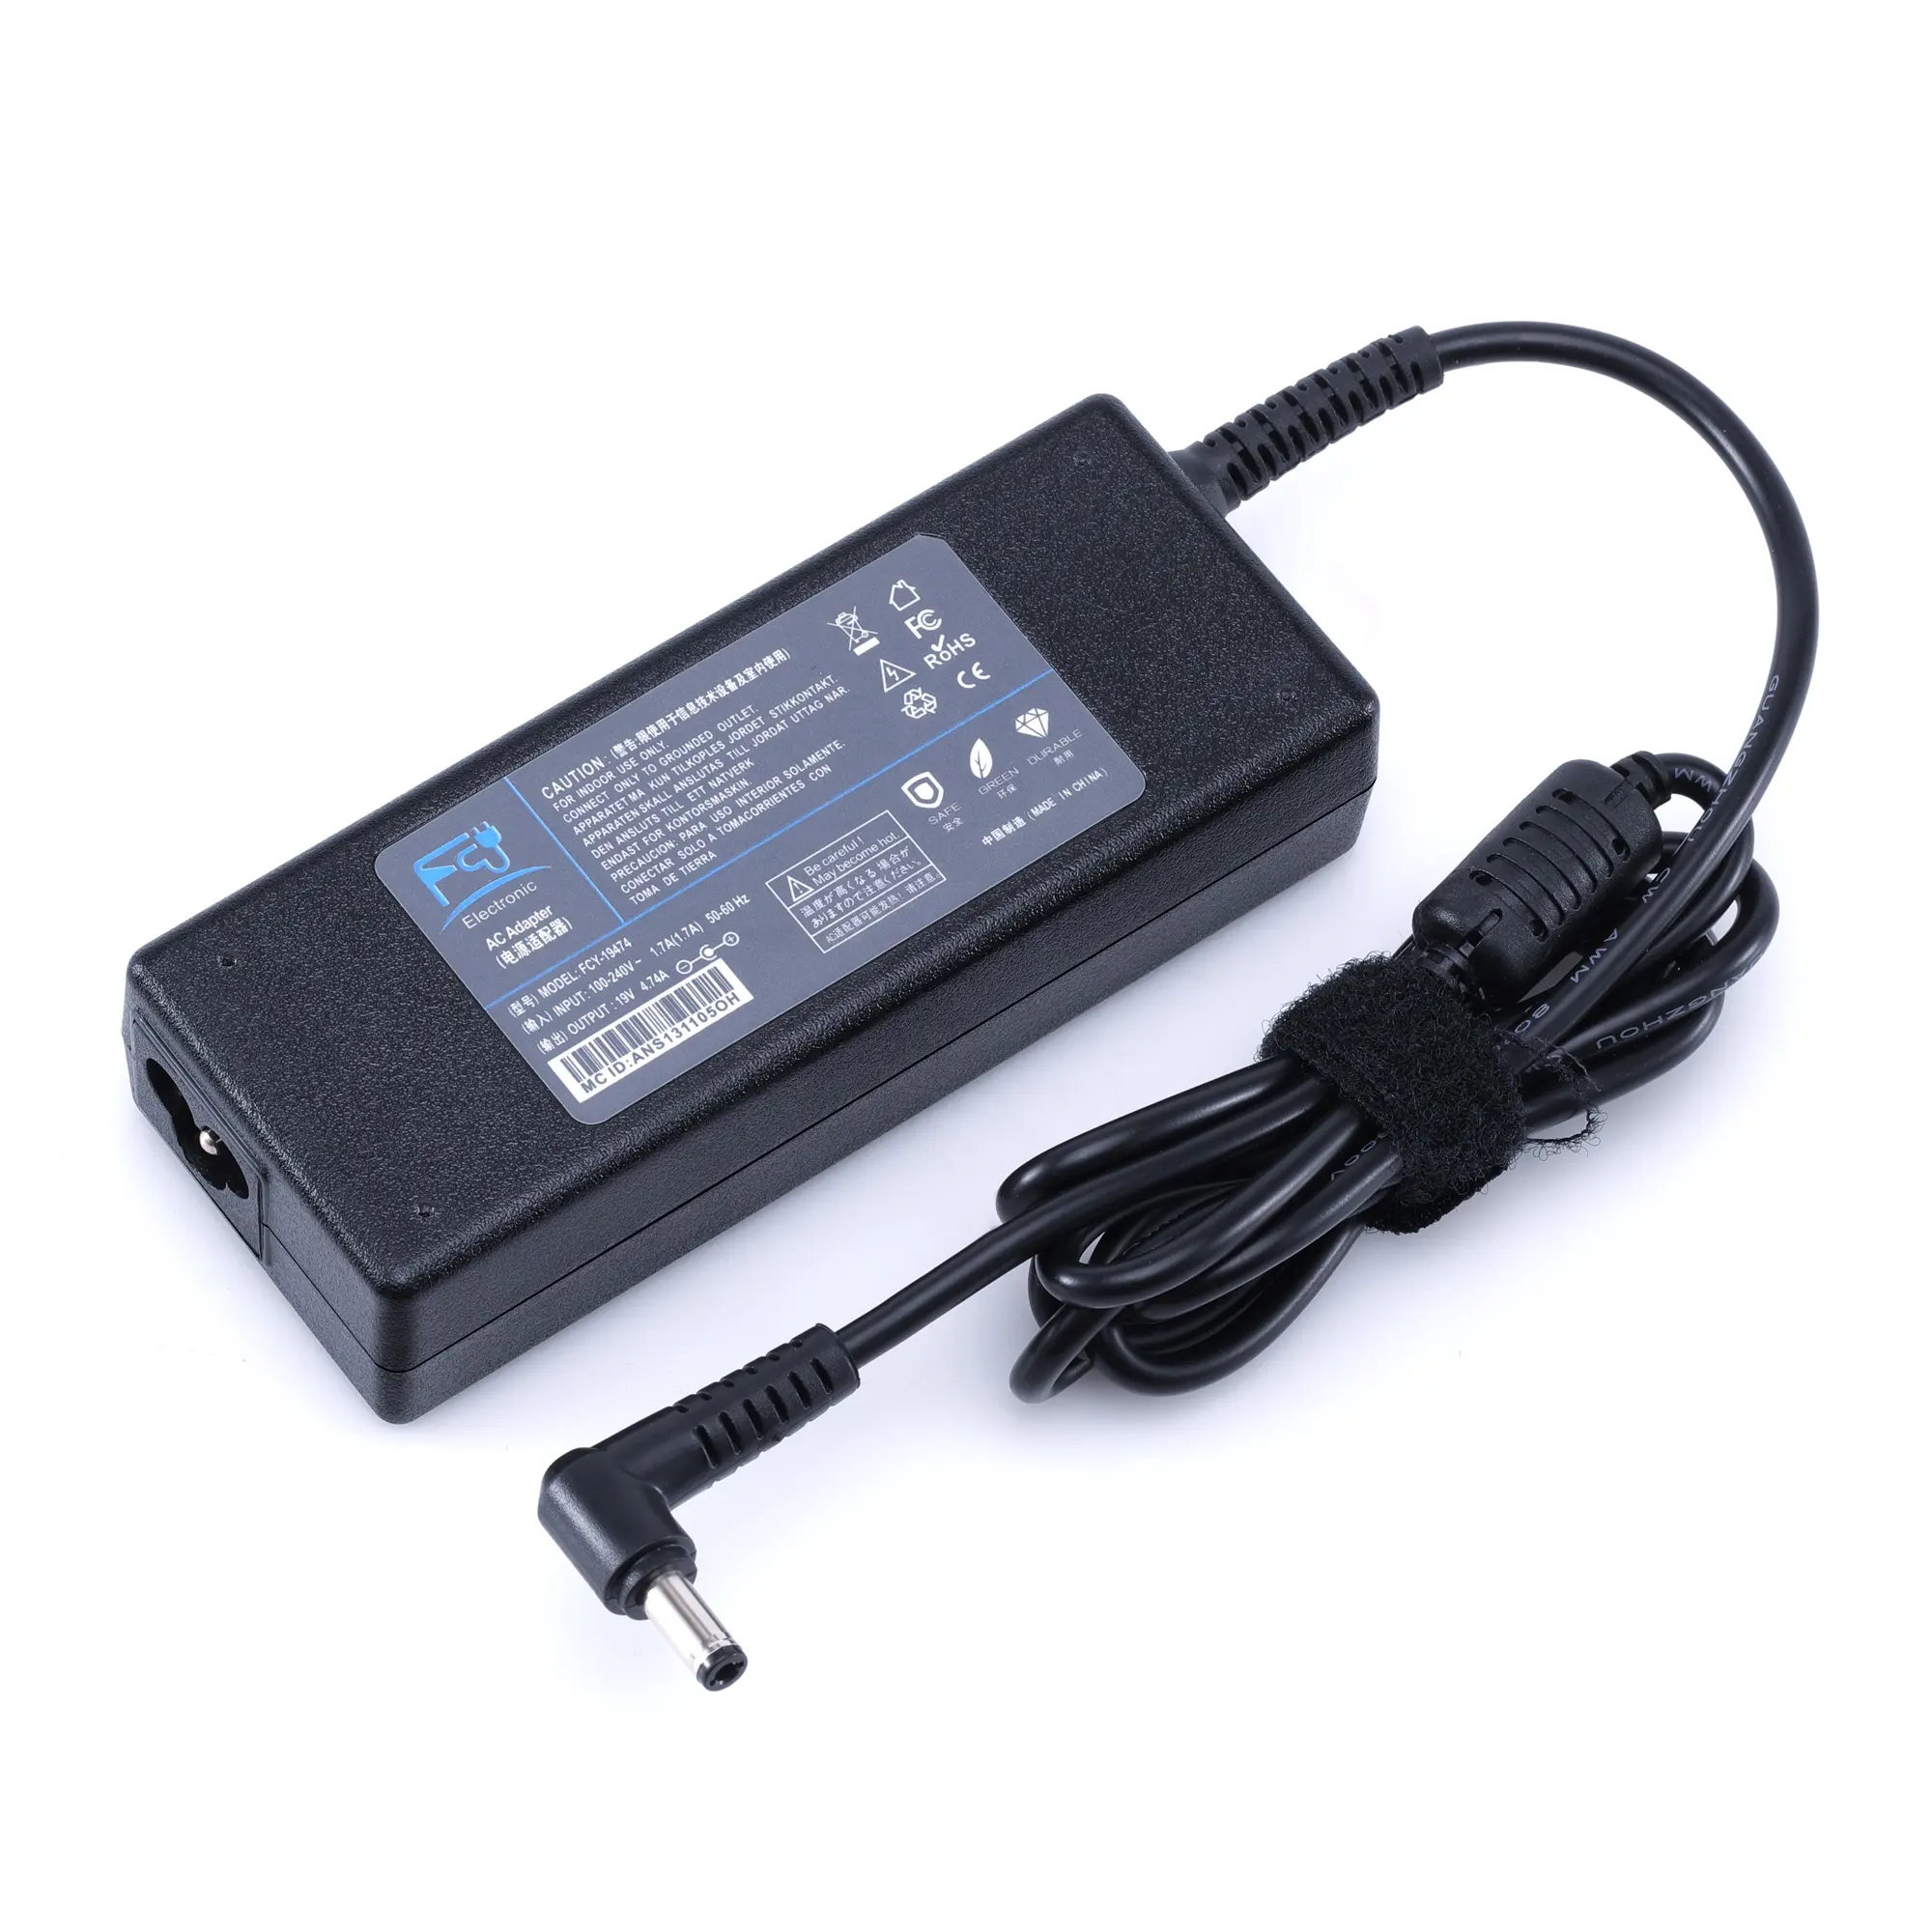 AC adapter 90W 19V 4.74A 5.5*2.5mm laptop charger for Lenovo, HP, Toshiba, Asus laptops